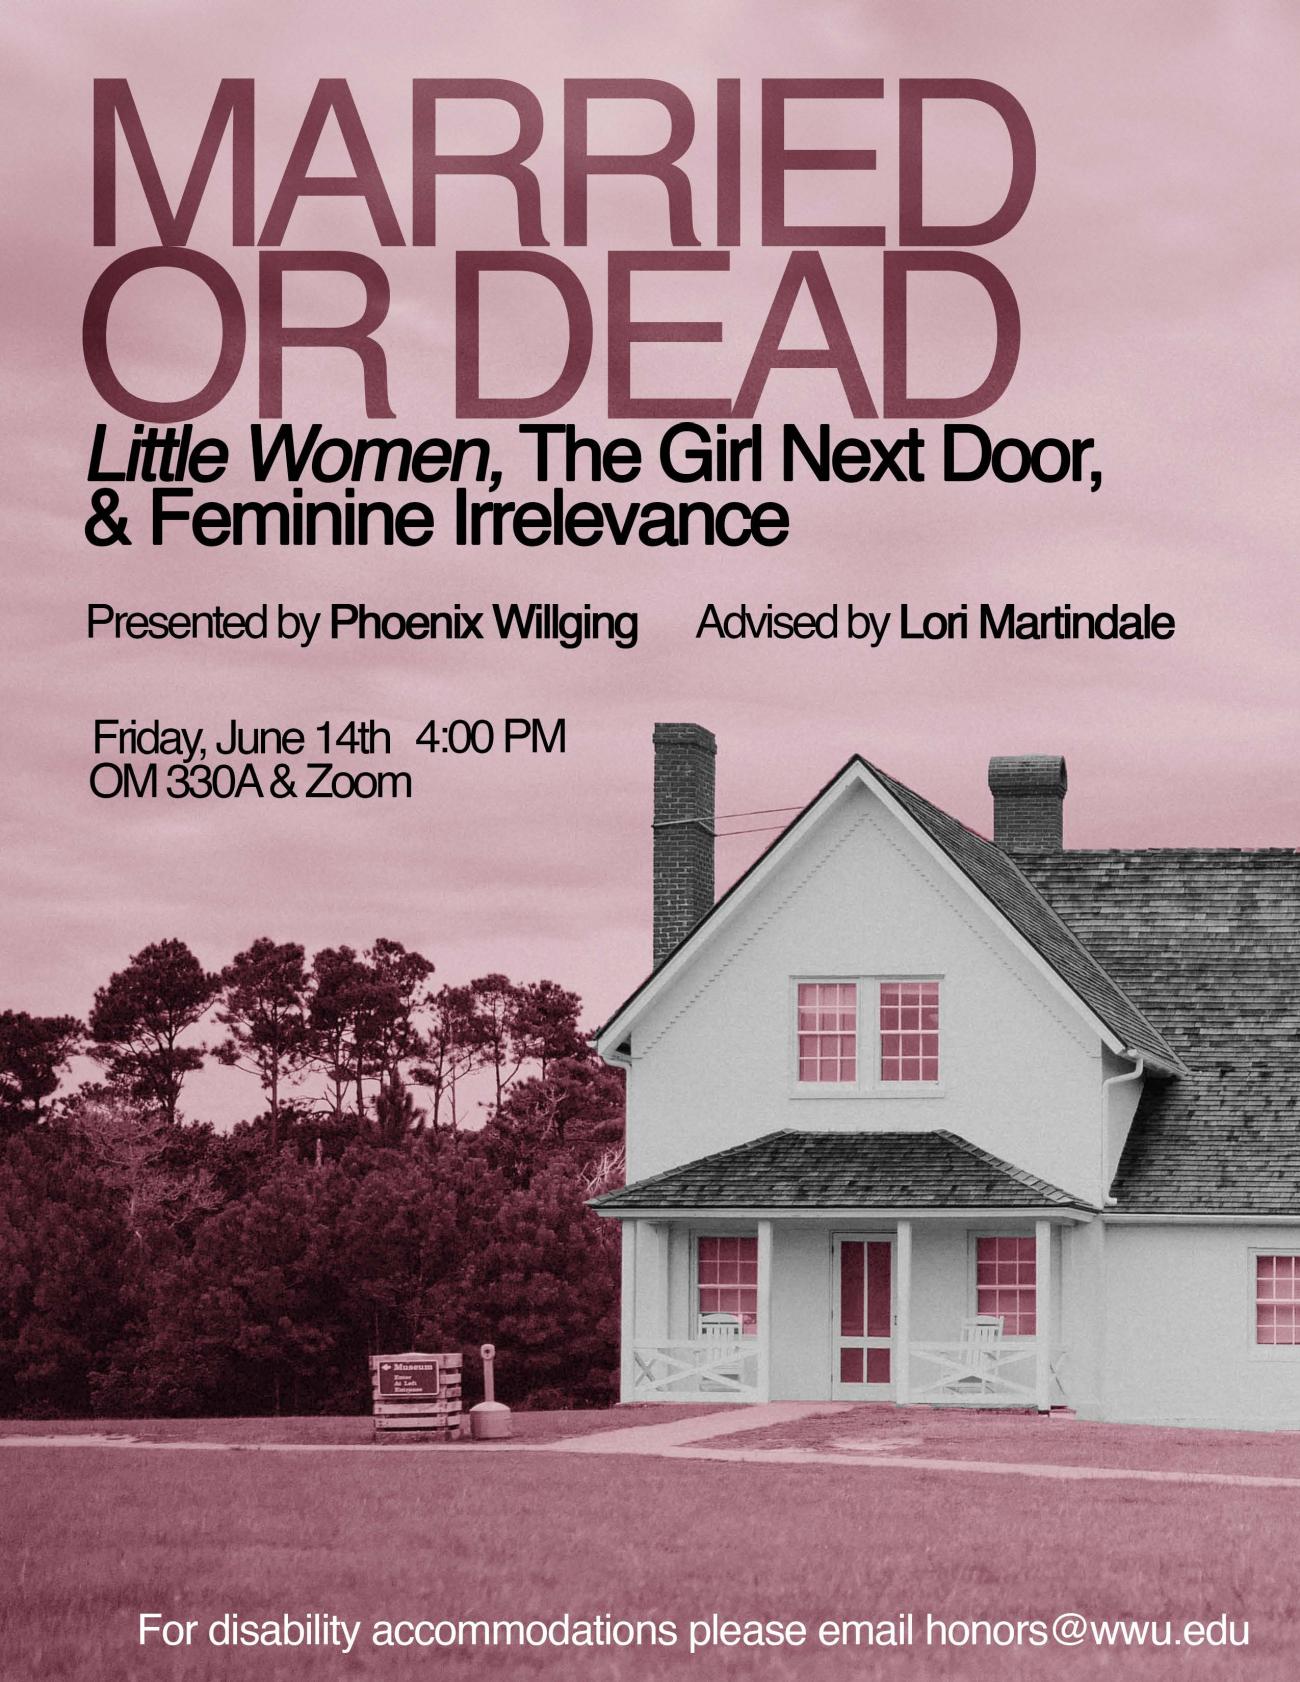 A pink toned poster with a white suburban house and front yard. The text reads "Married or Dead: Little Women, The Girl Next Door and Feminine Irrelevance. Presented by Phoenix Willging. Advised by Lori Martindale. June 14th 4:00PM OM 330A and Zoom. For disability accommodations, please email honors@wwu.edu."